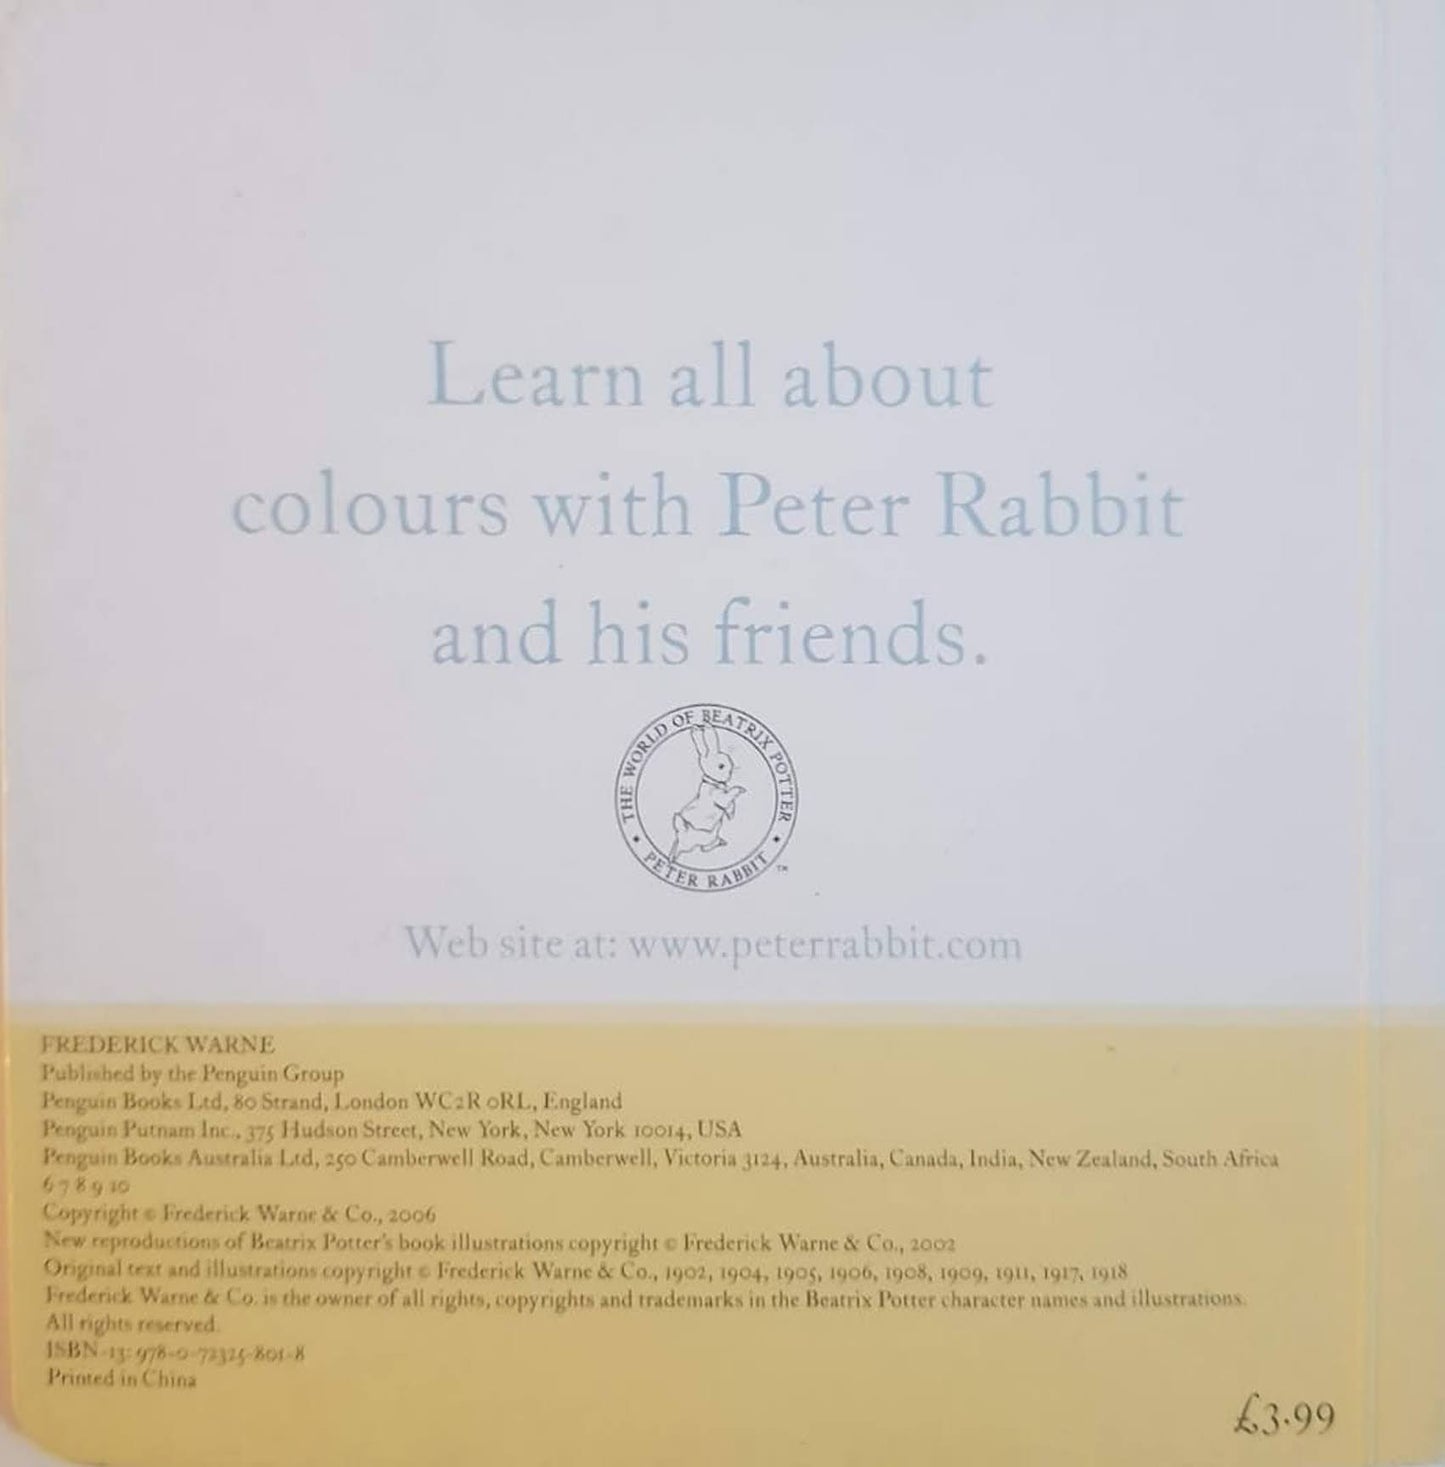 Colours with Peter Rabbit Like New Recuddles.ch  (6228979417273)